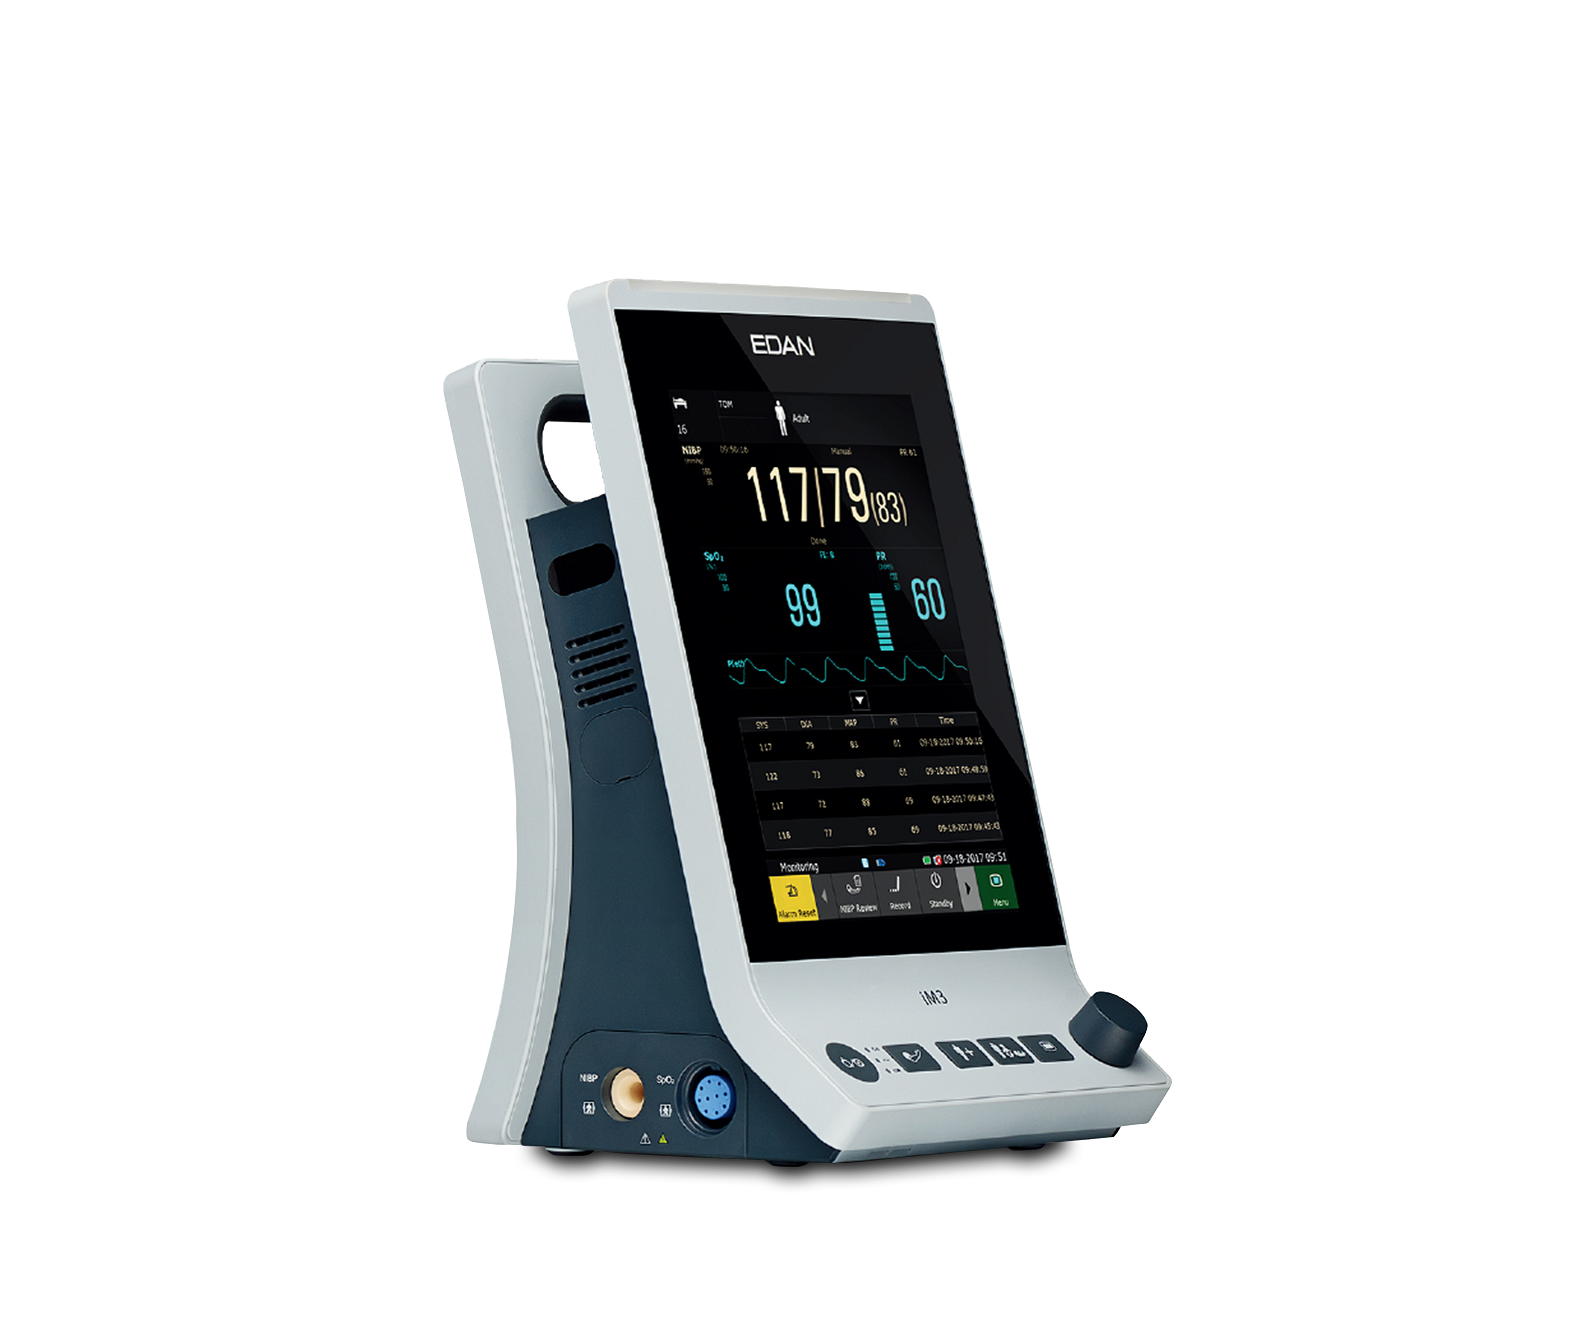 Anesmed / iM3 Vital Signs Monitor